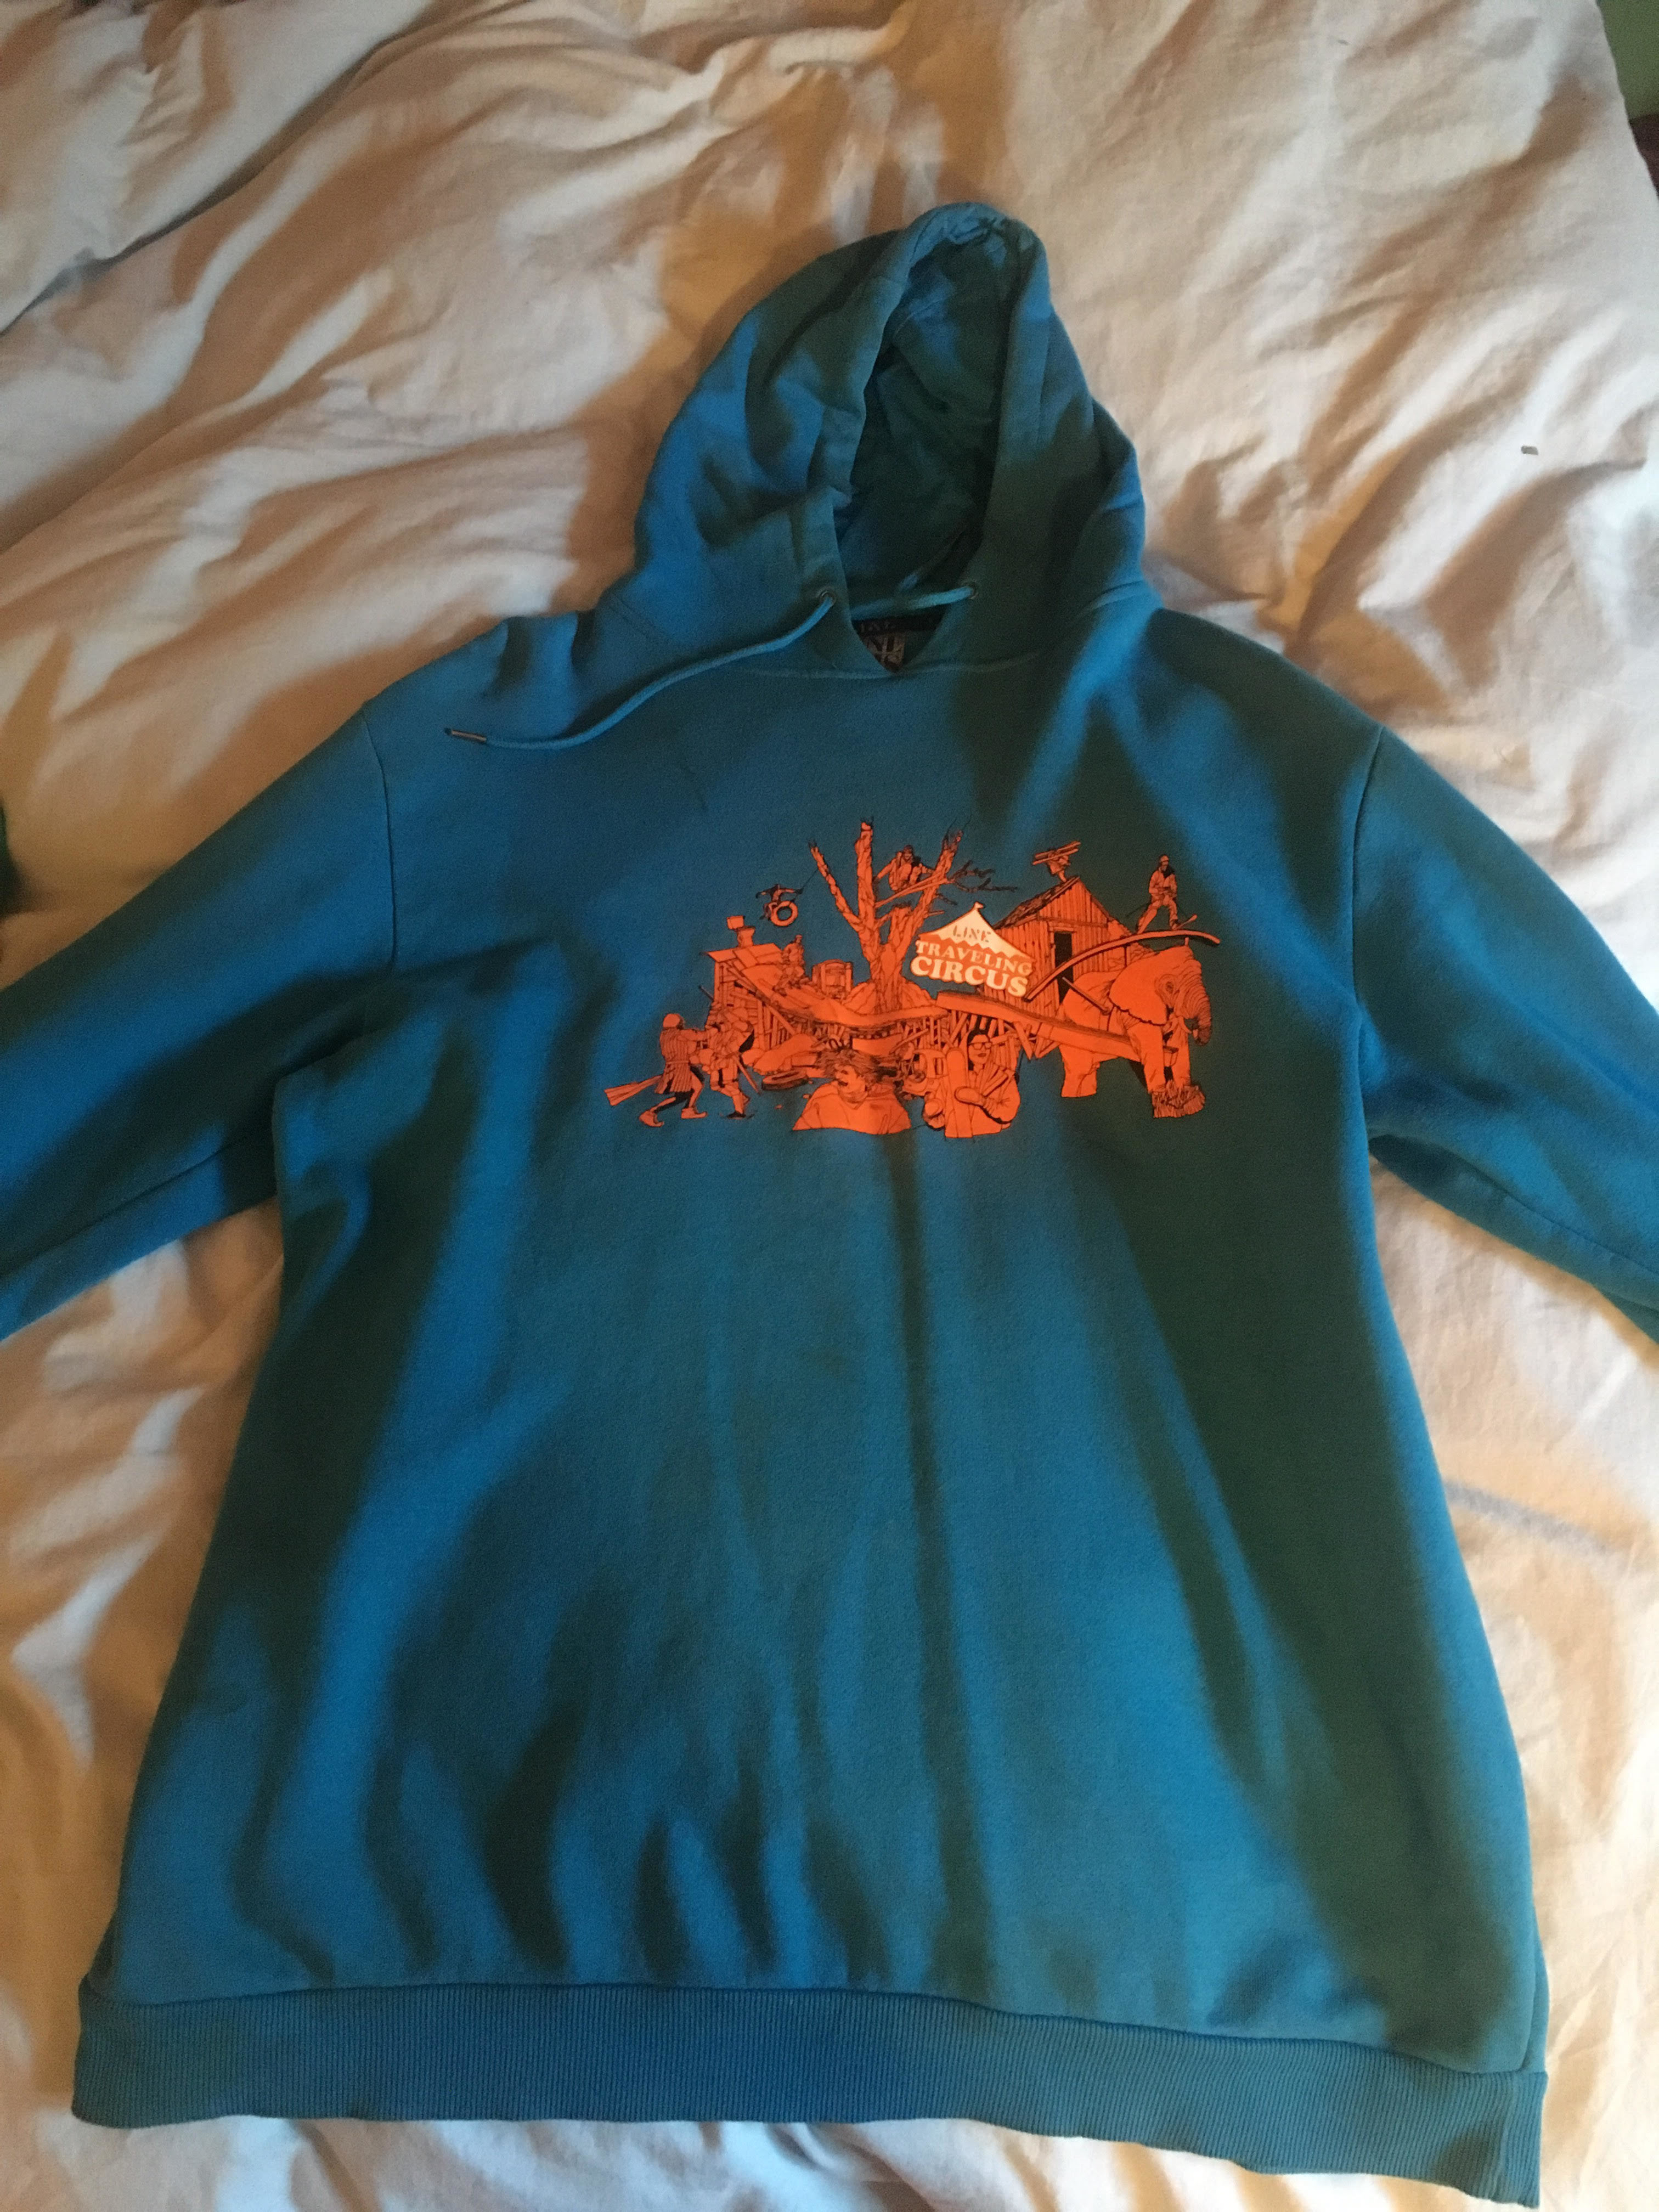 Nordica Ace 2 Star 25.5, Jiberish Line Hoodie, Coach Jacket - Sell and ...